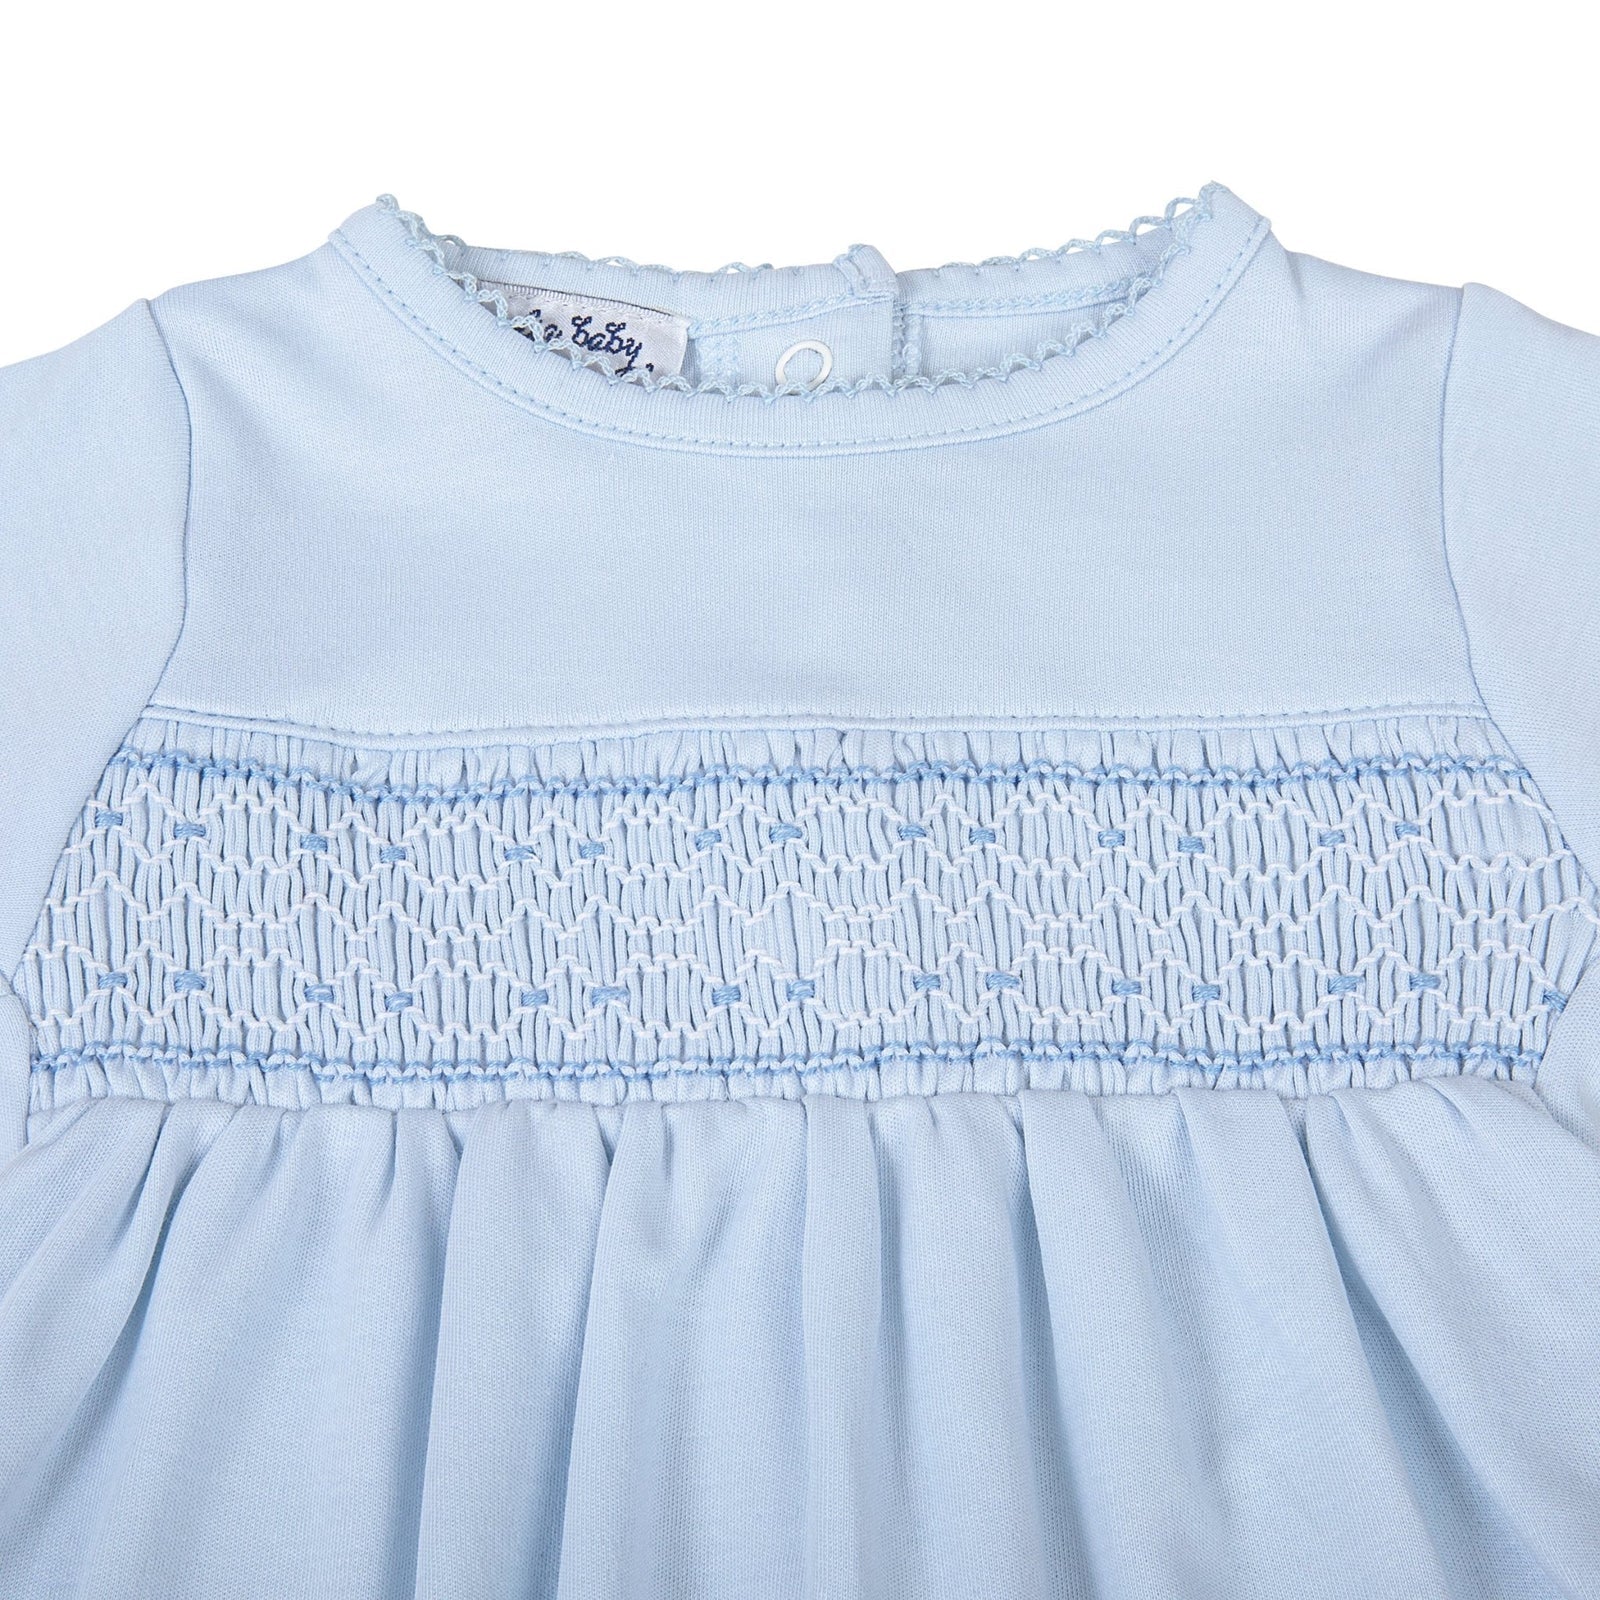 Pink and Blue Smocked Footie | Blue